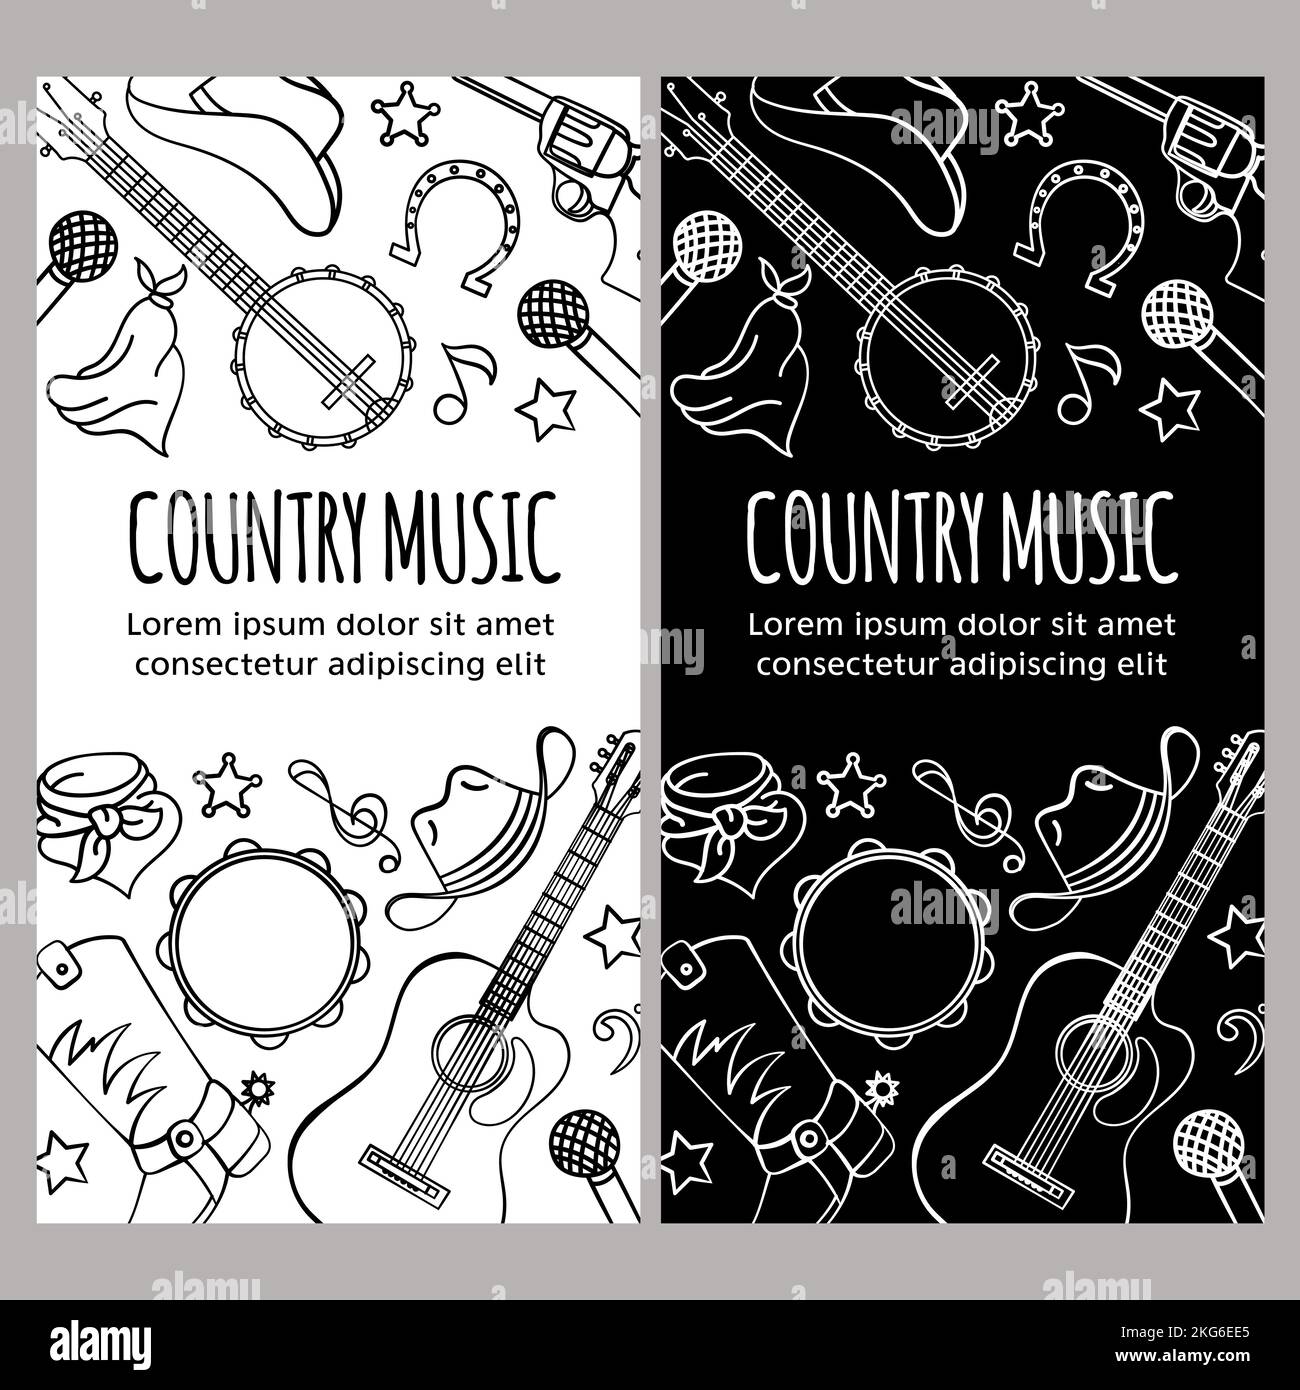 COUNTRY MUSIC FLYER American Cowboy Western Festival Vector Illustration Set For Print Stock Vector